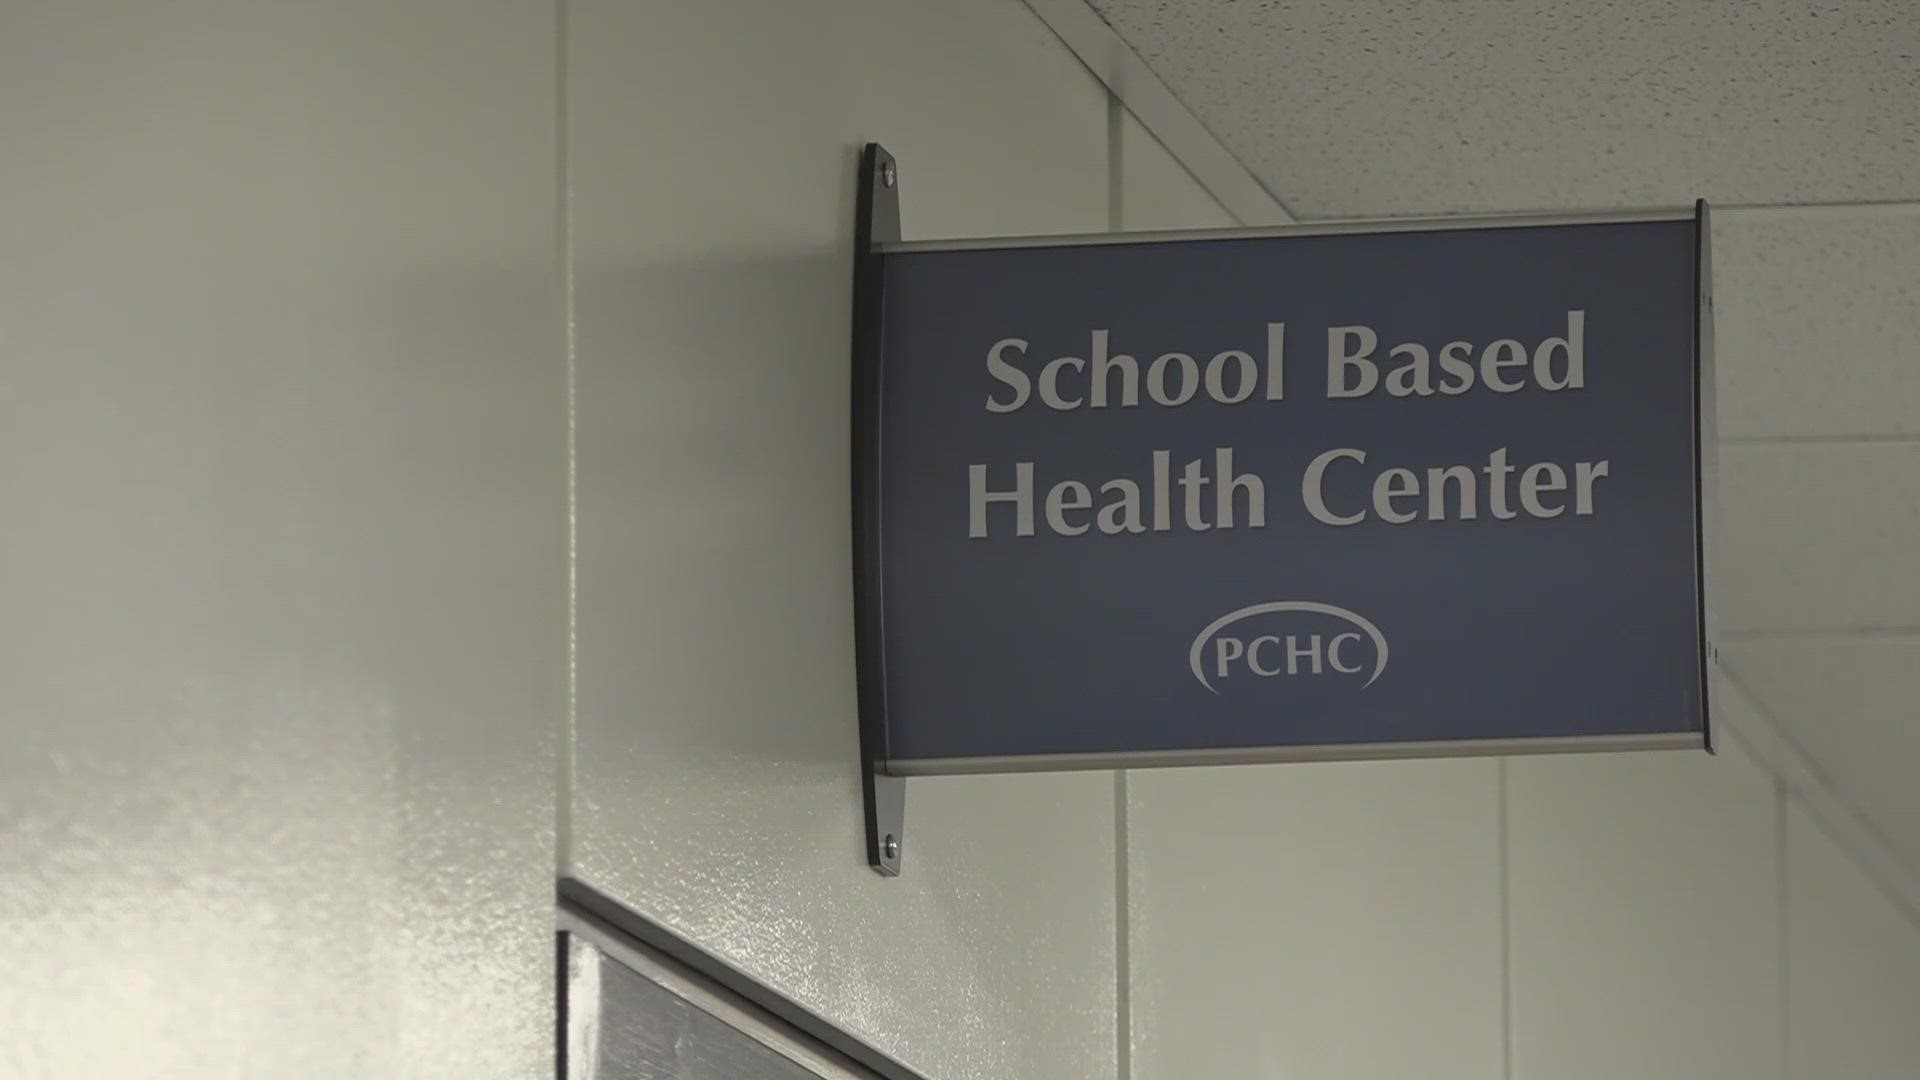 The SBHC clinic has been open for a year, and Penobscot Community Health Care says mental health counseling is the most used service by students and staff.